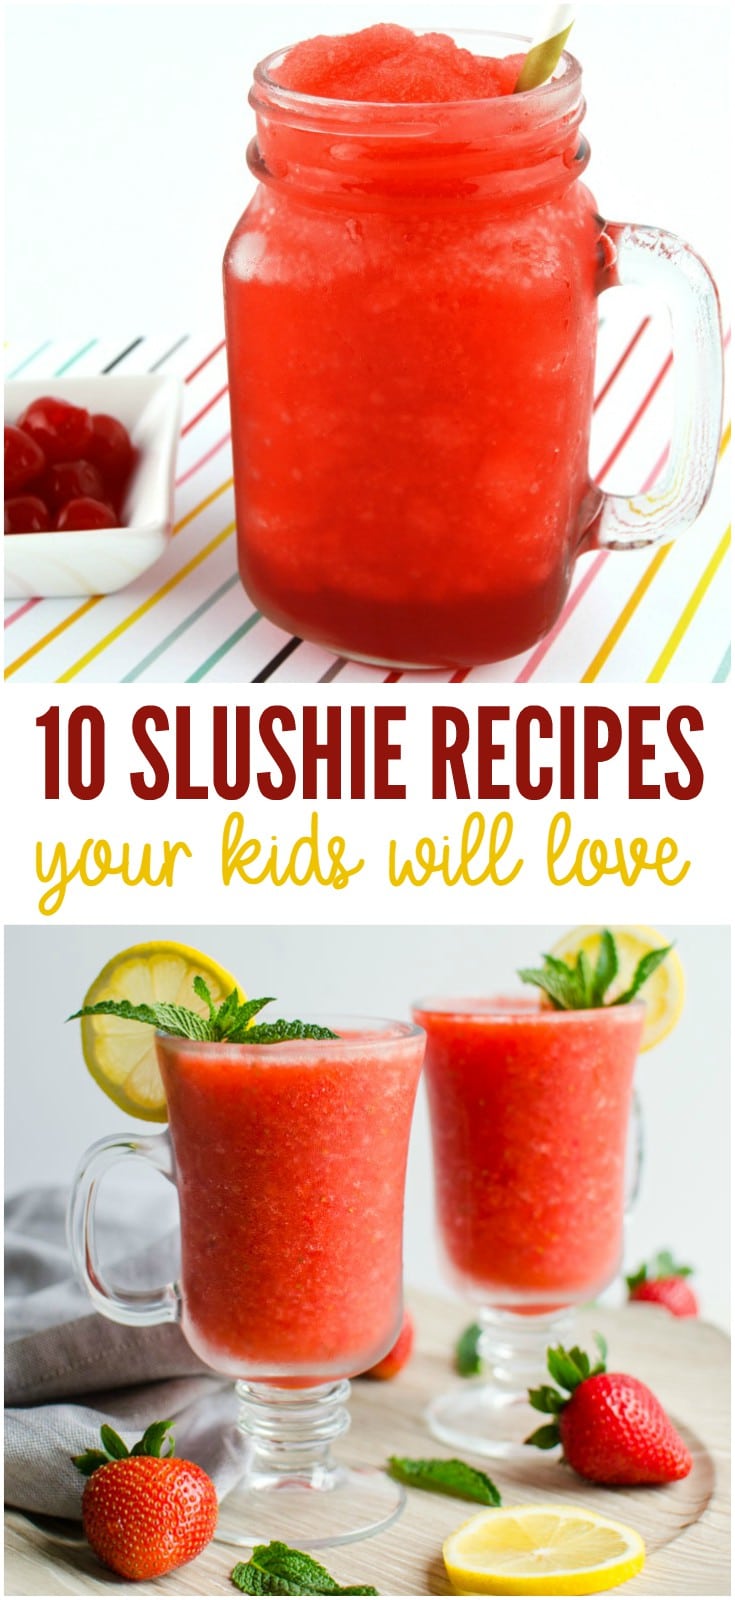 Keep the kids cool and happy this summer with these 10 yummy slushie recipes for kids!